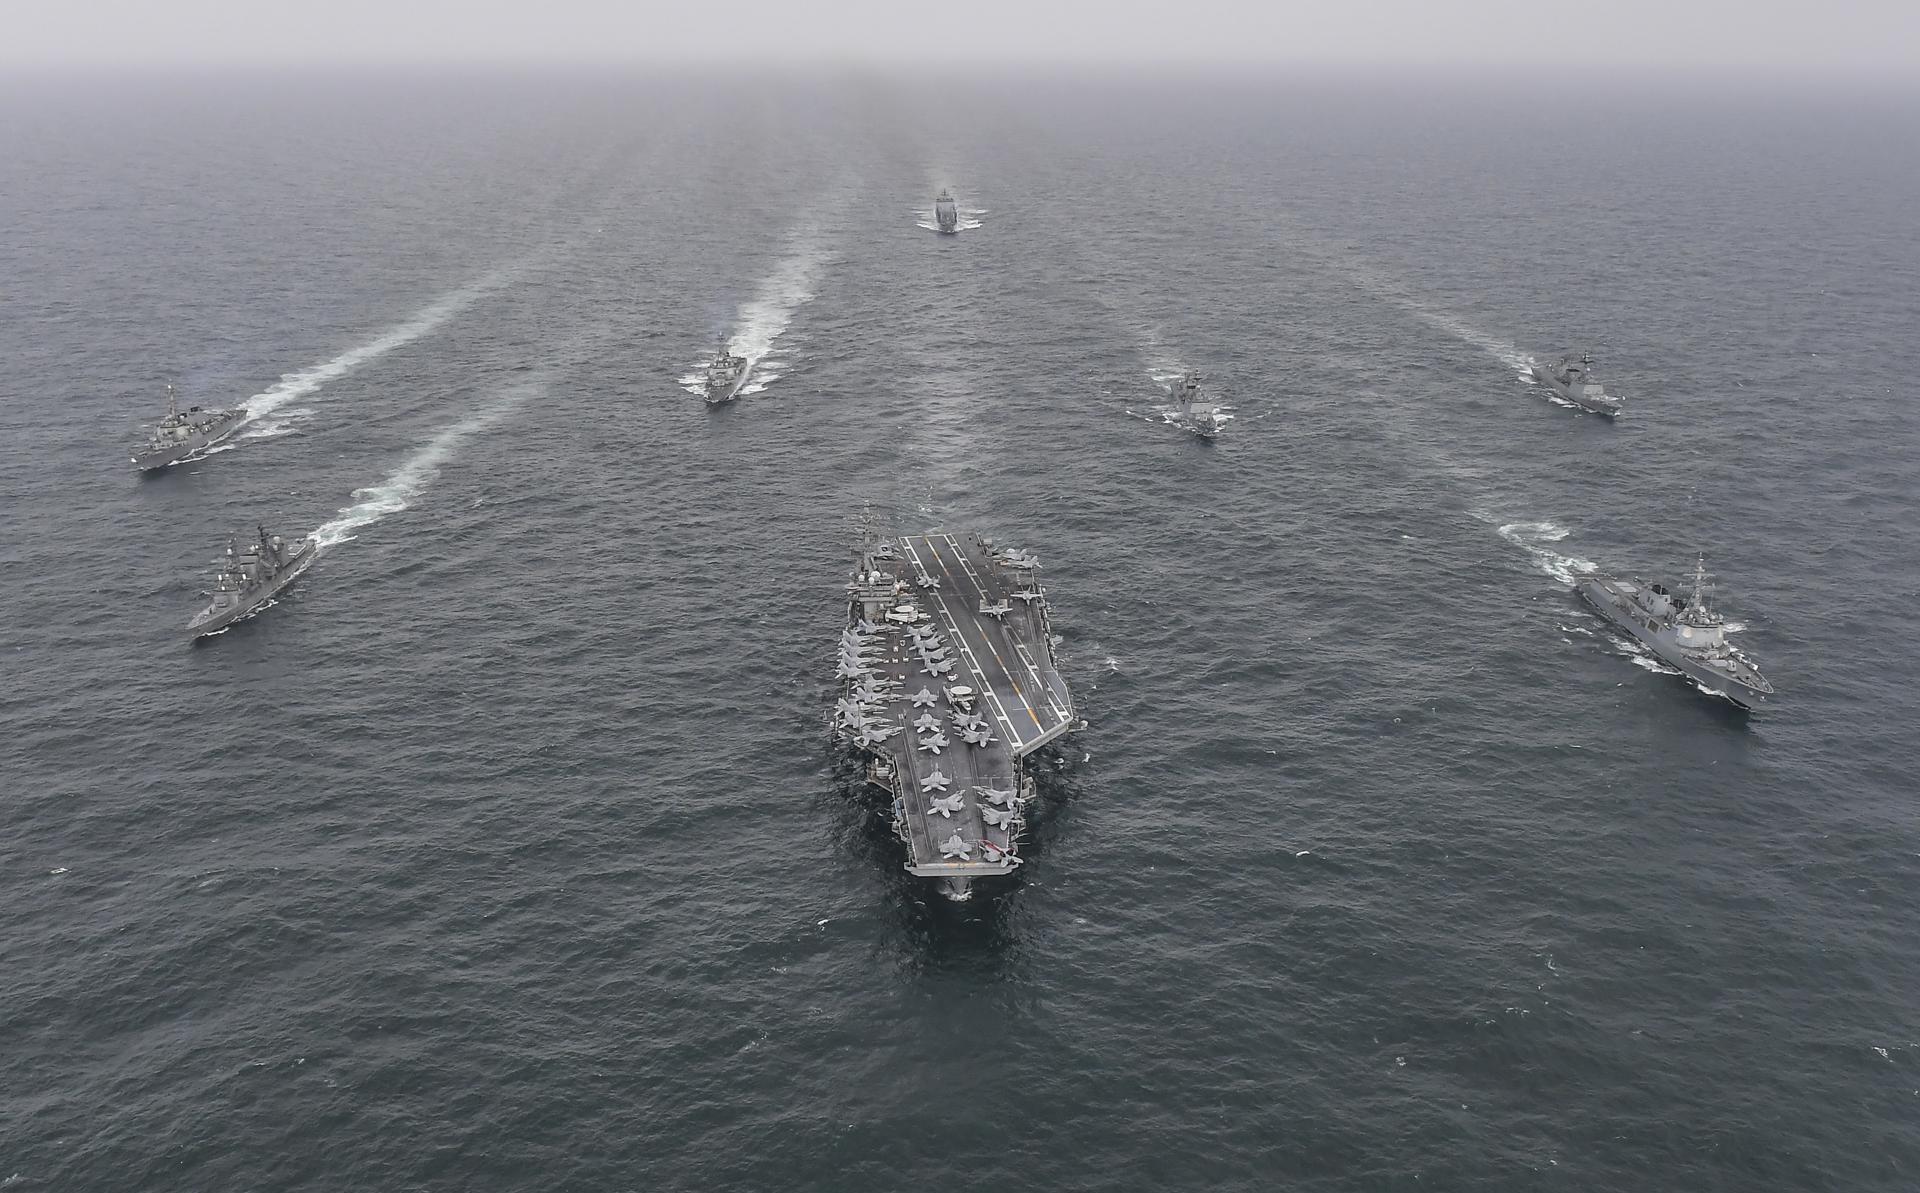 A handout photo made available by the South Korean Defense Ministry shows US Navy's aircraft carrier USS Nimitz CVN-68 (front C), South Korean Navy's destroyer Yulgok Yi I DDG-992 (front R) and Japan Maritime Self-Defense Force's Umigiri DD-158 (front L) during a joint naval exercise in South Korea, 04 April 2023. EFE-EPA/South Korean Defense Ministry HANDOUT EDITORIAL USE ONLY/NO SALES